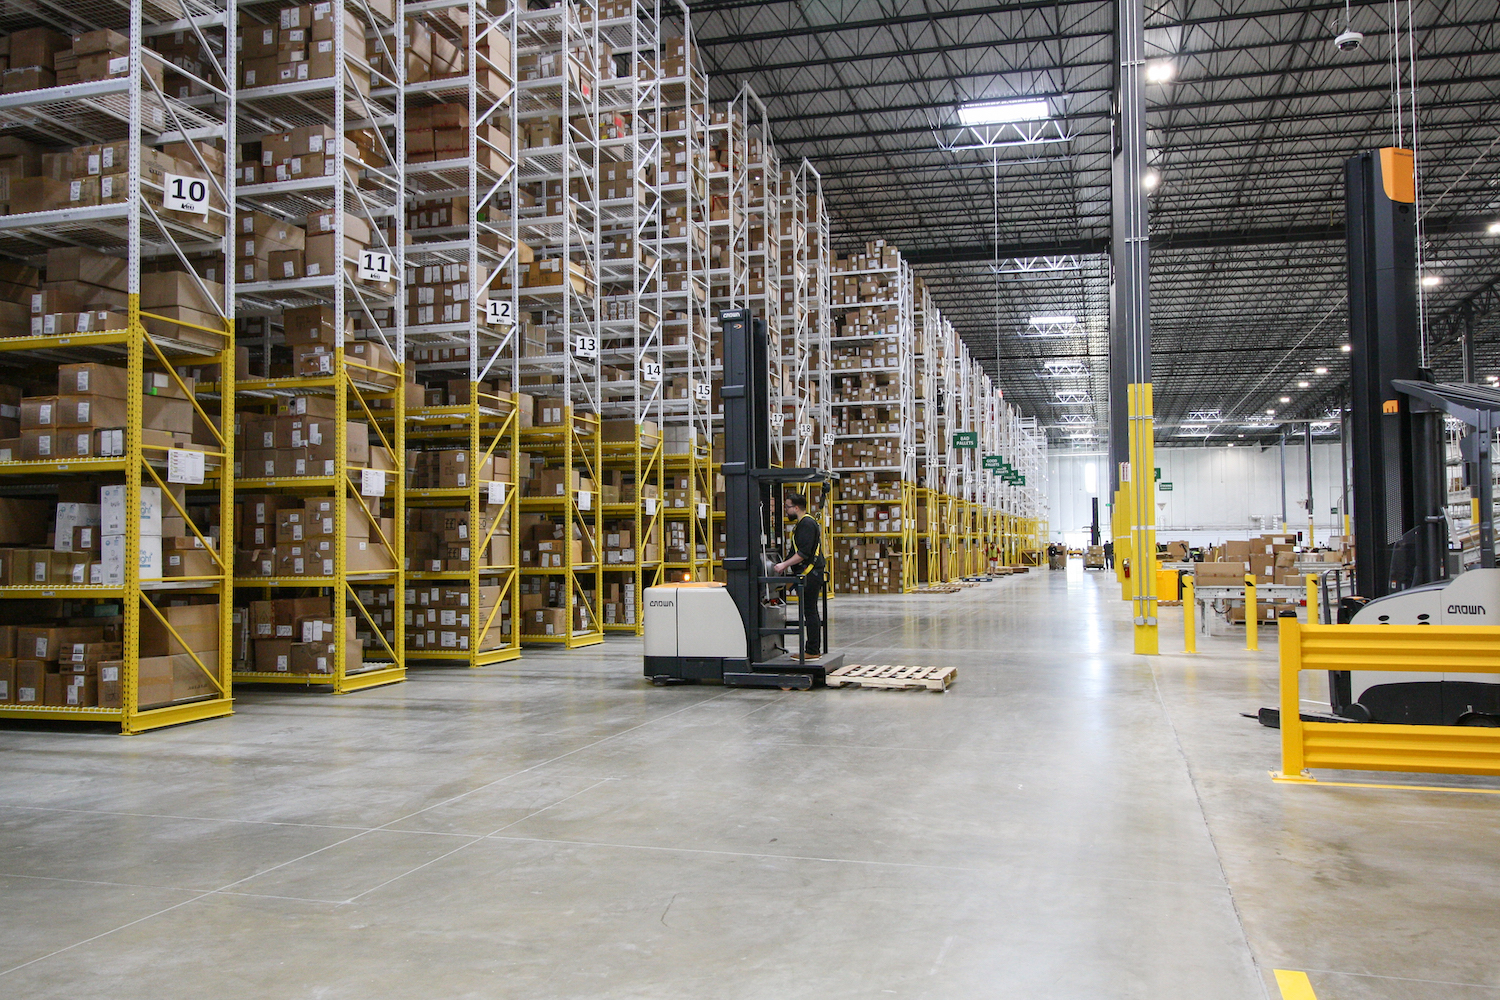 An employee operates a forklift along floor-to-ceiling shelving filled with boxes inside REI's distribution center. 